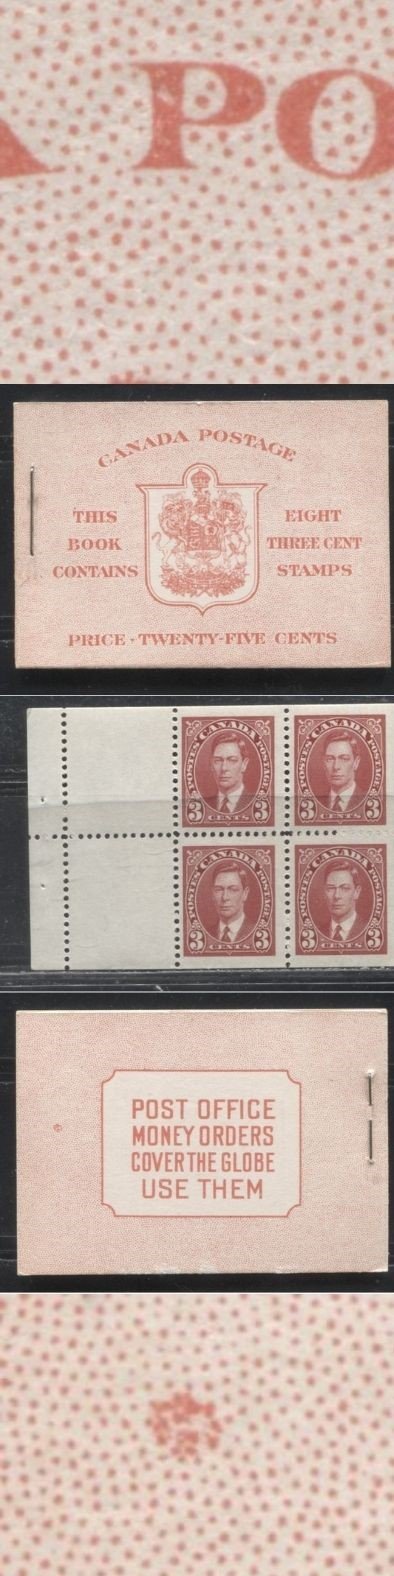 Lot 142 Canada #BK30cEIIe 3c Carmine Red King George VI 1937-1942 Mufti Issue, A Fine NH Complete English Booklet Containing 2 Panes of 4 + 2 Labels , Cover type IIe, 6c Airmail Rate, Ribbed Panes, Constant Large Dot Flaw on Back Cover